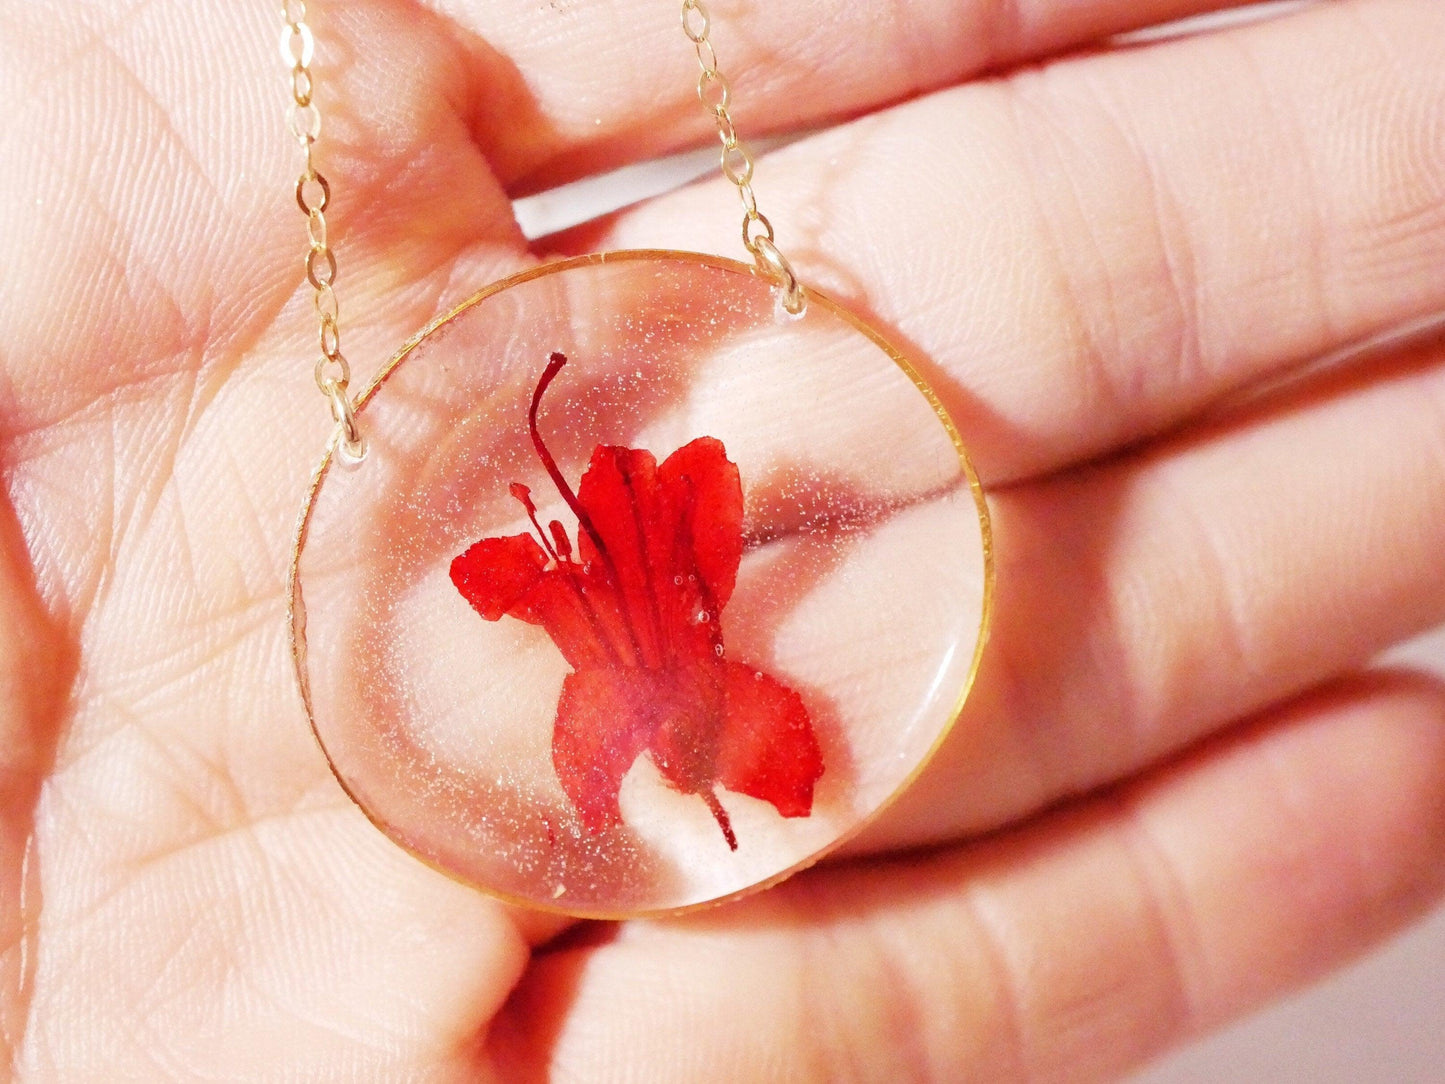 How to Make a Flower Necklace, Flower Jewelry